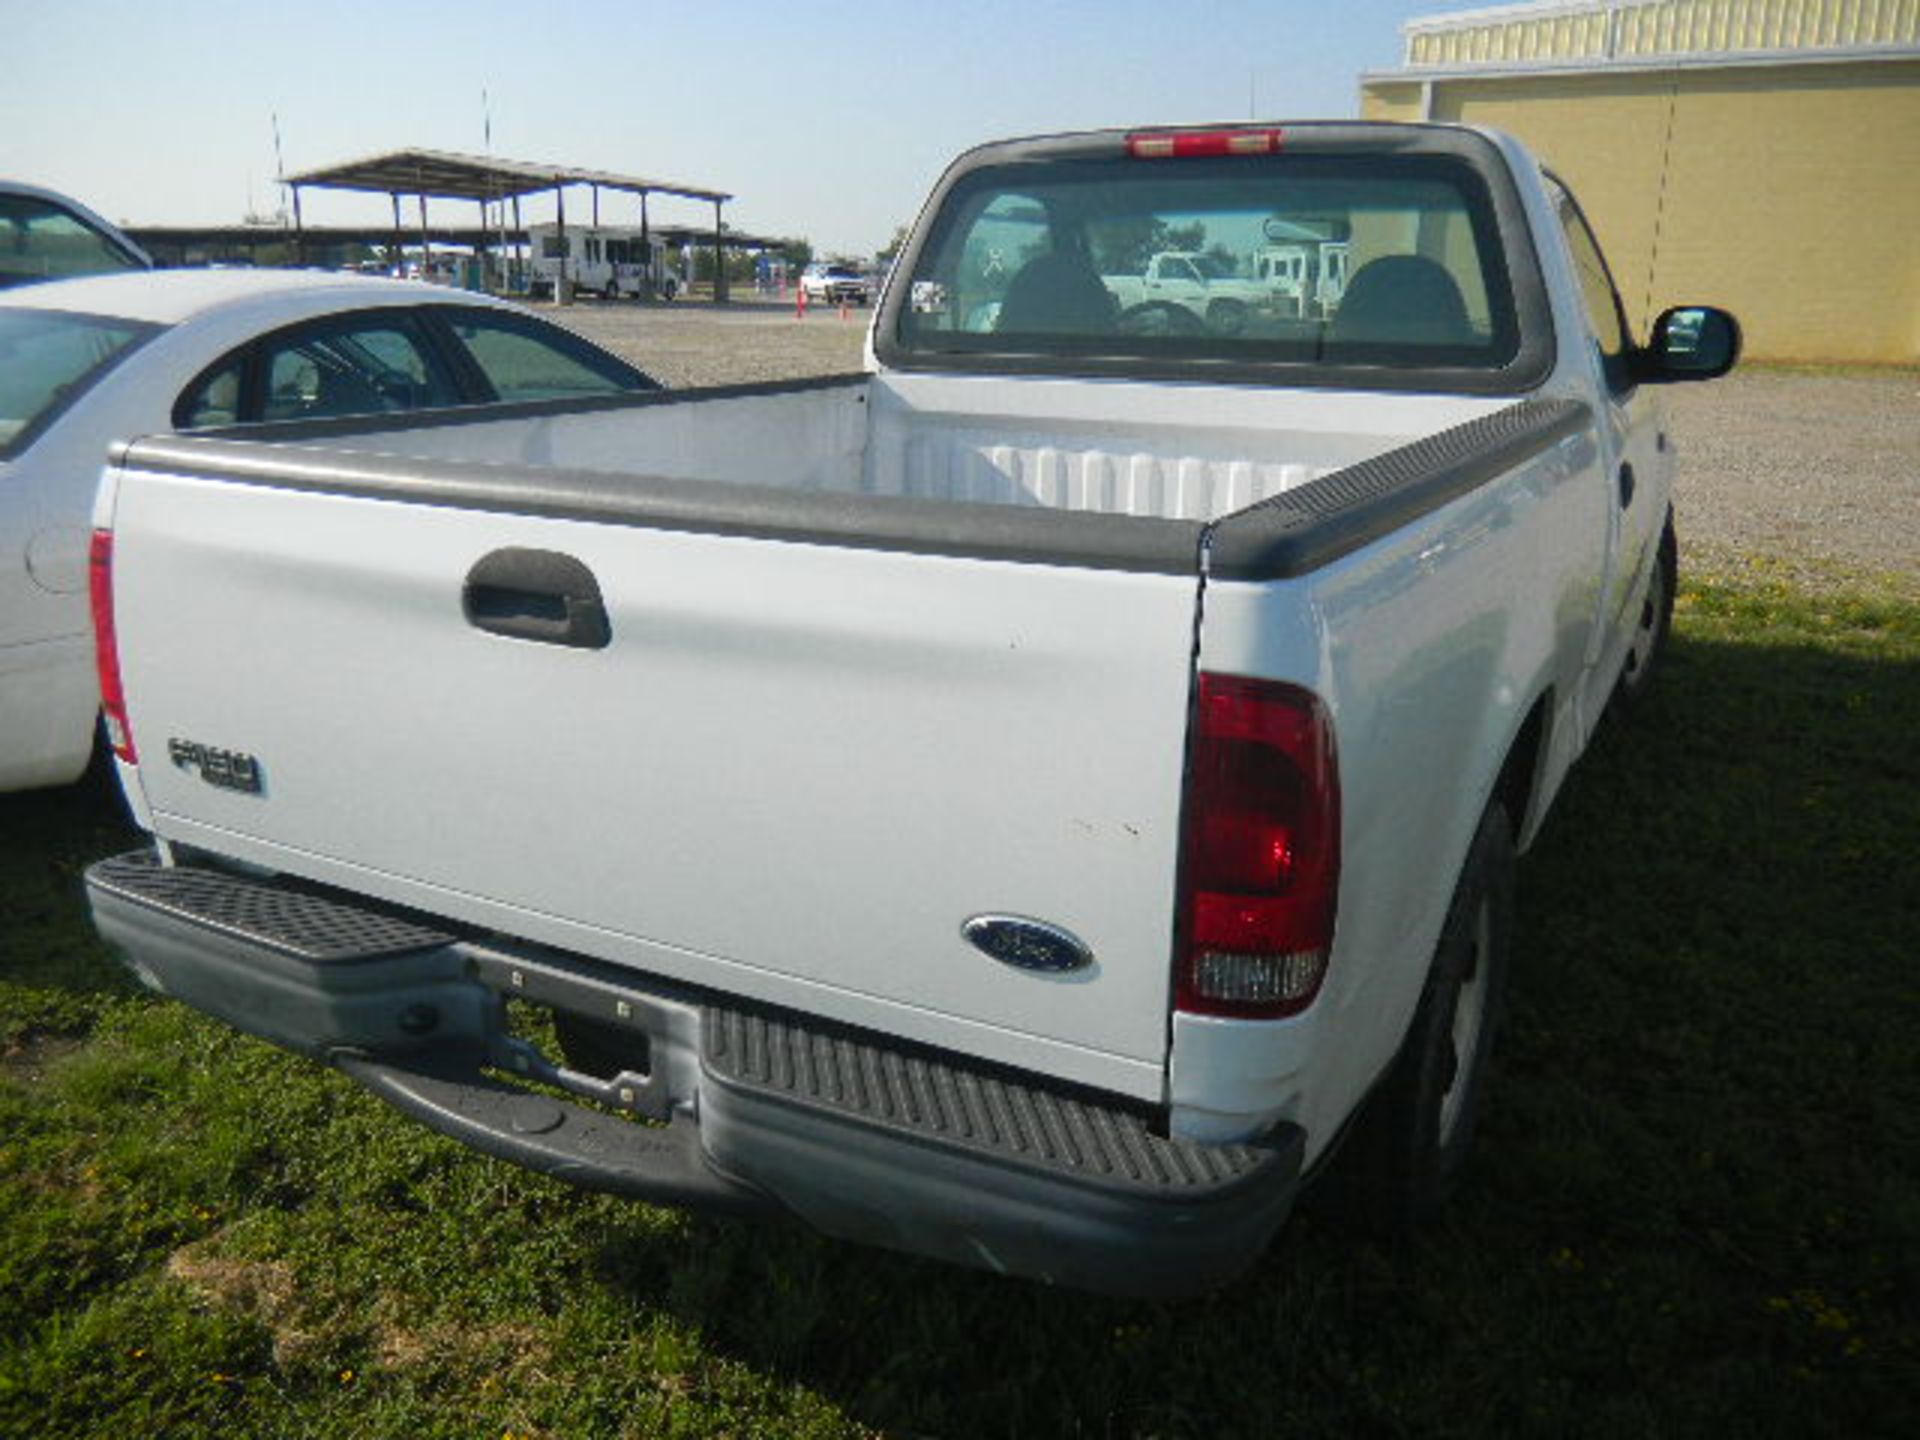 2004 Ford F-150 XL Pickup Truck - Asset I.D. #Un-Known - Last of Vin (CA81704) - Image 4 of 7